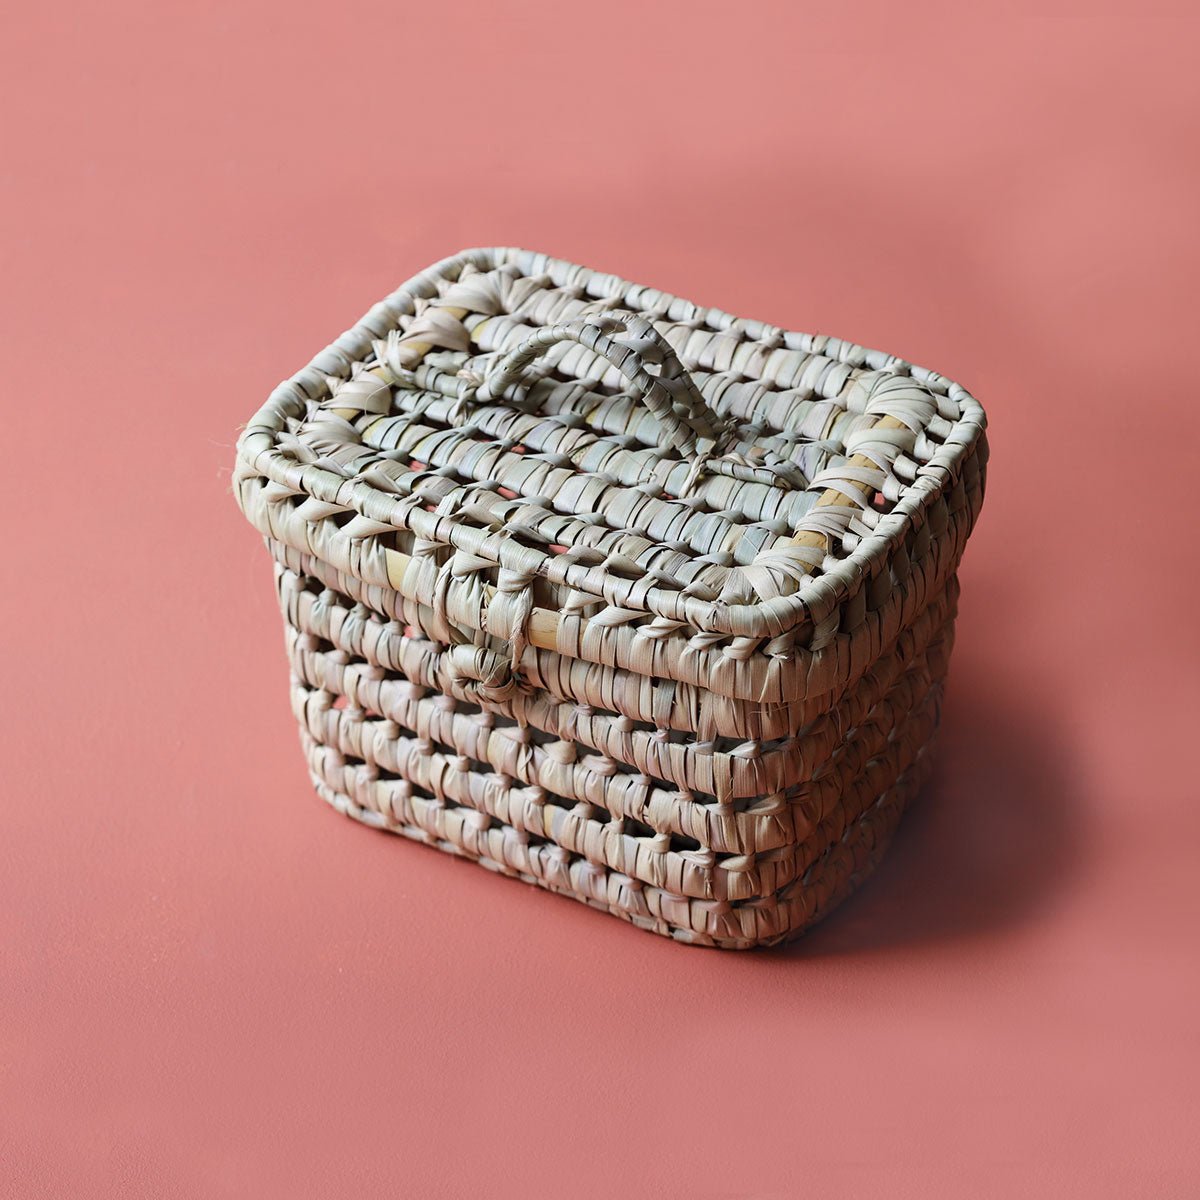 Woven Vanity or Lunch Basket - Artisan Stories